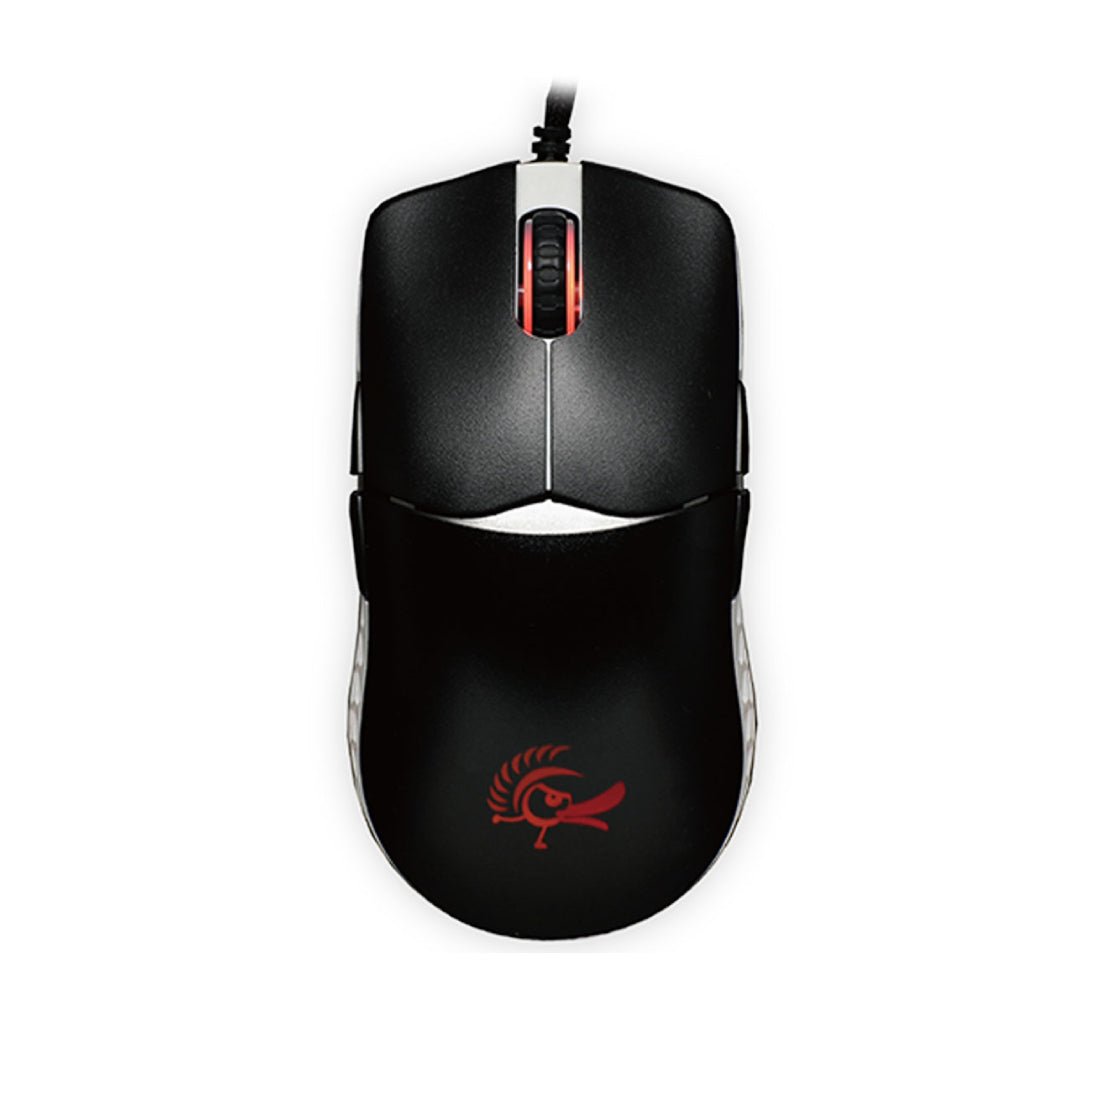 Ducky Feather Black & White Wired Gaming Mouse - Omron - فأرة - Store 974 | ستور ٩٧٤